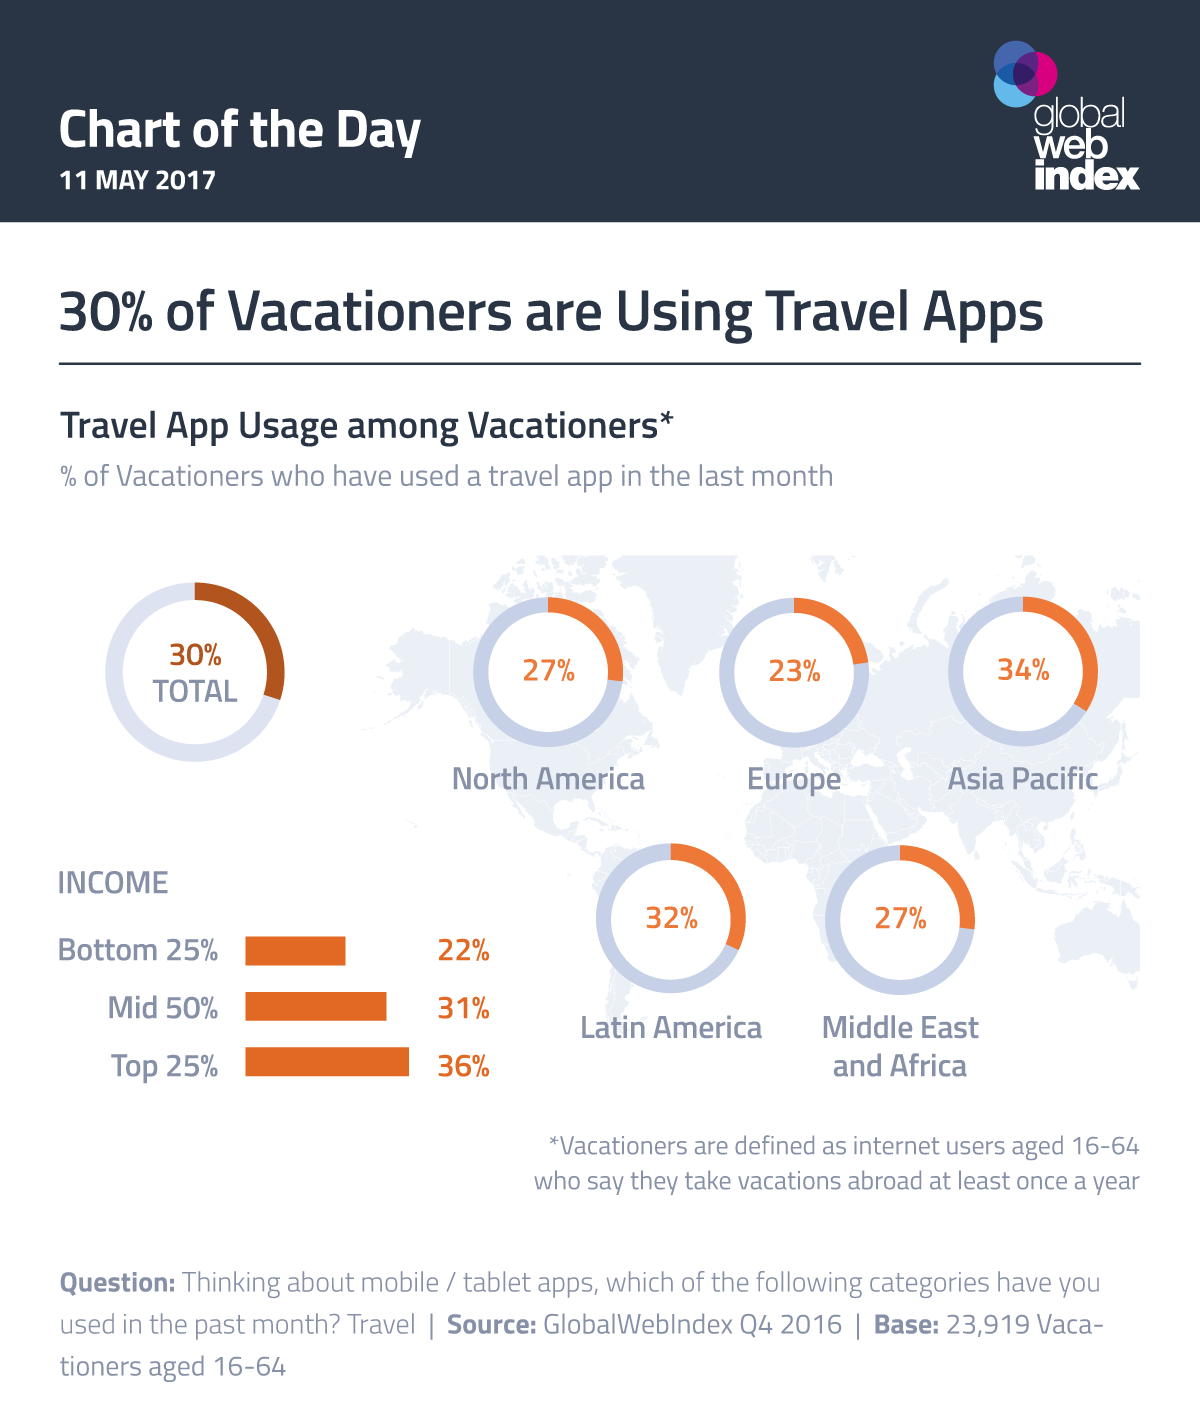 30% of Vacationers are Using Travel Apps